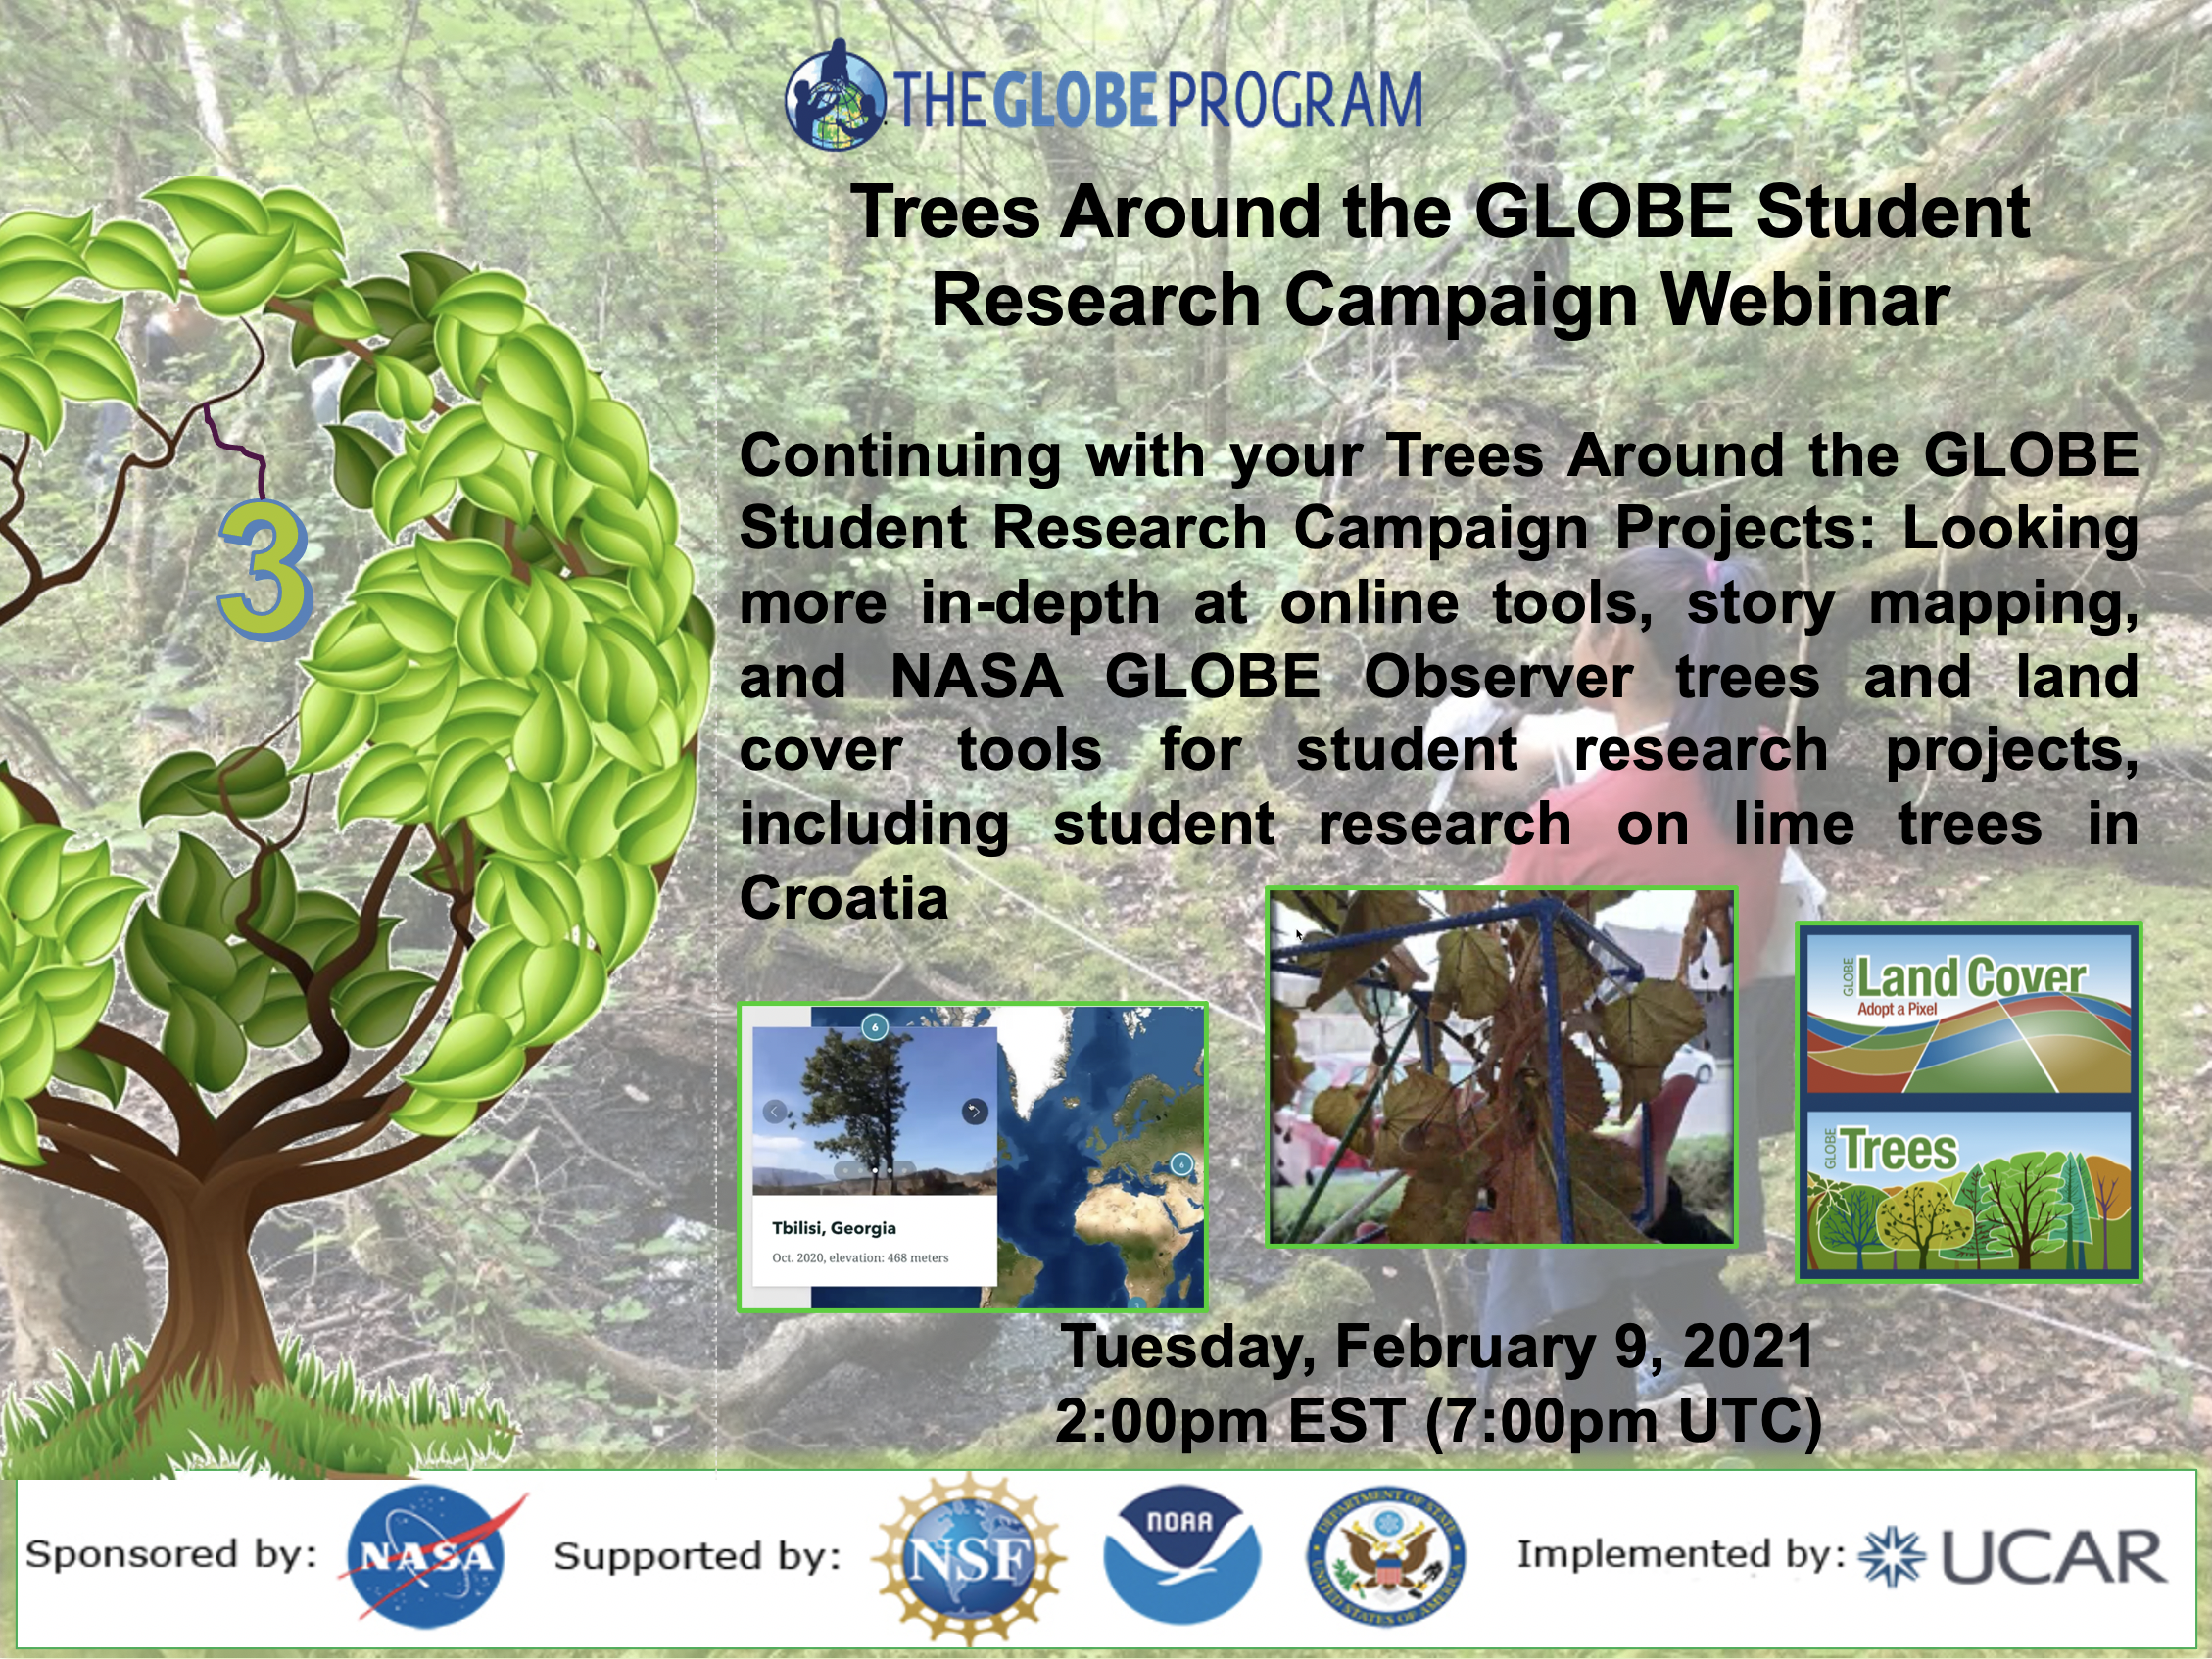 Trees Around the GLOBE Student Research Campaign 09 February Webinar Shareable.